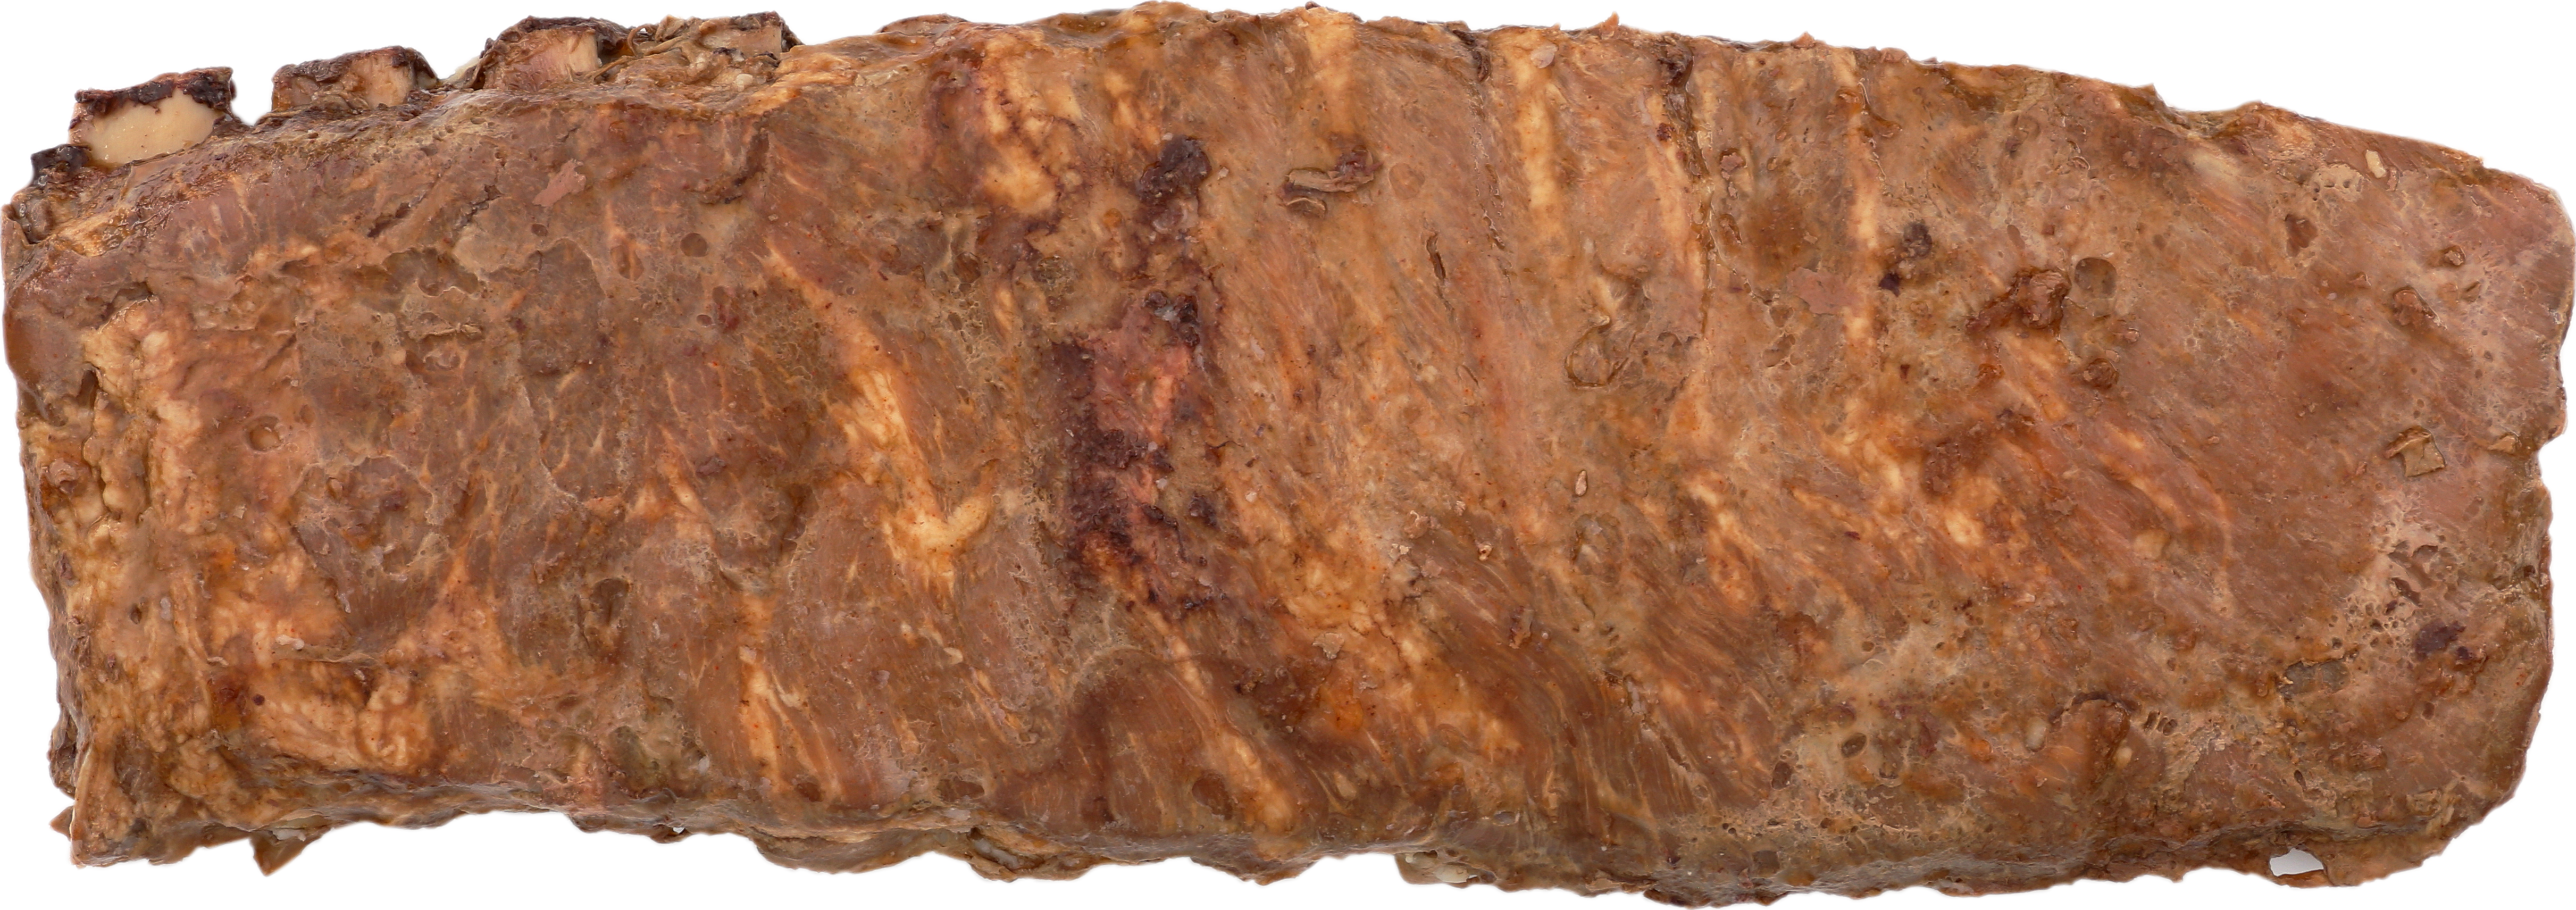 Black Oak™ Fully Cooked, Seasoned St. Louis Style PK Spare Ribs, SMK Flavor and CRML Color Added _image_21